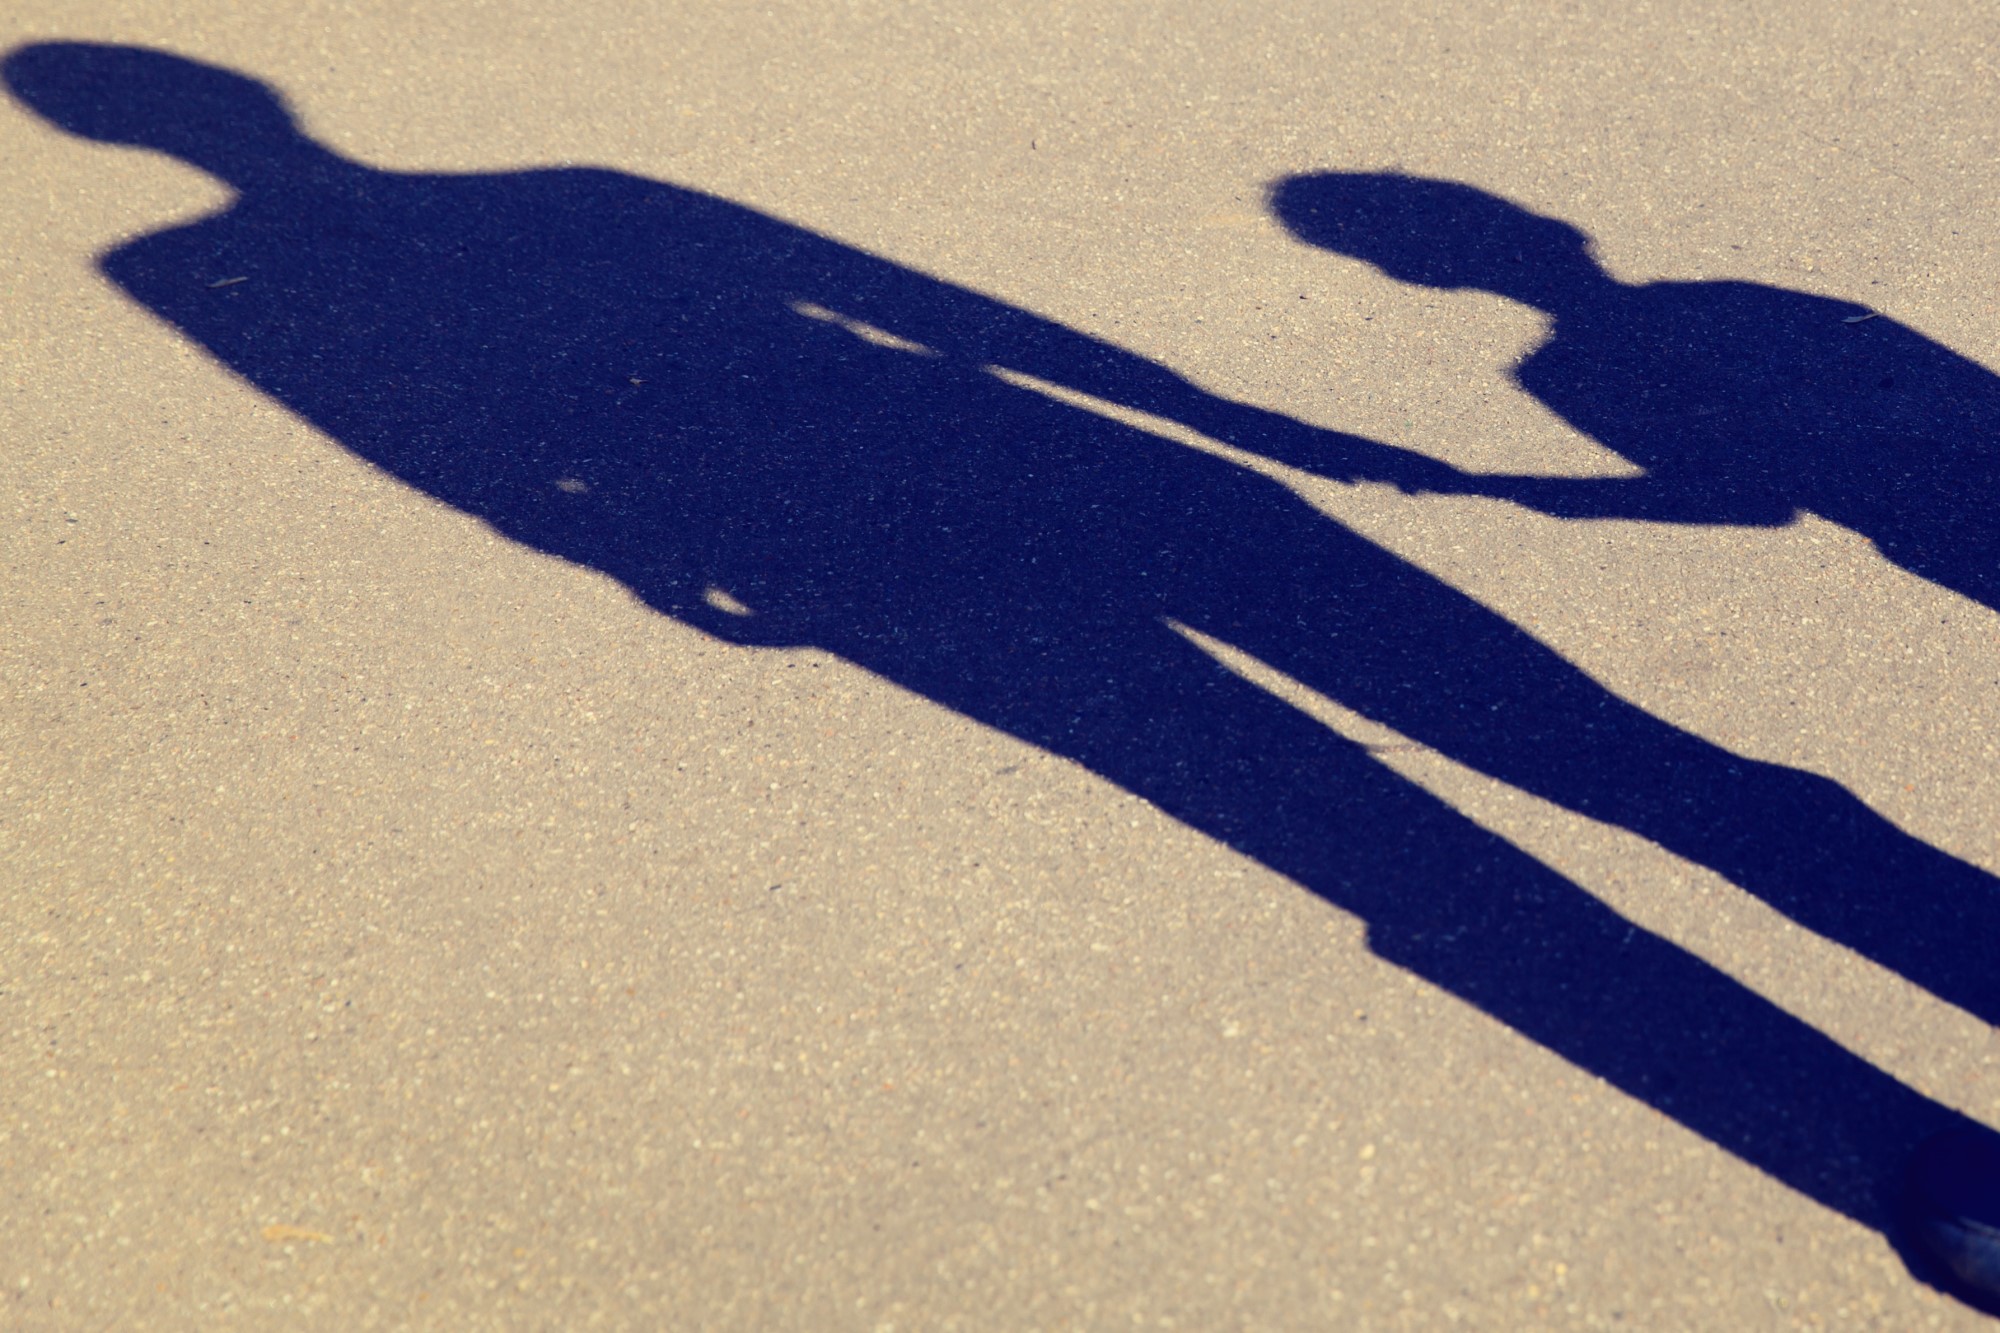 photograph of shadow on asphalt of parent holding child's hand